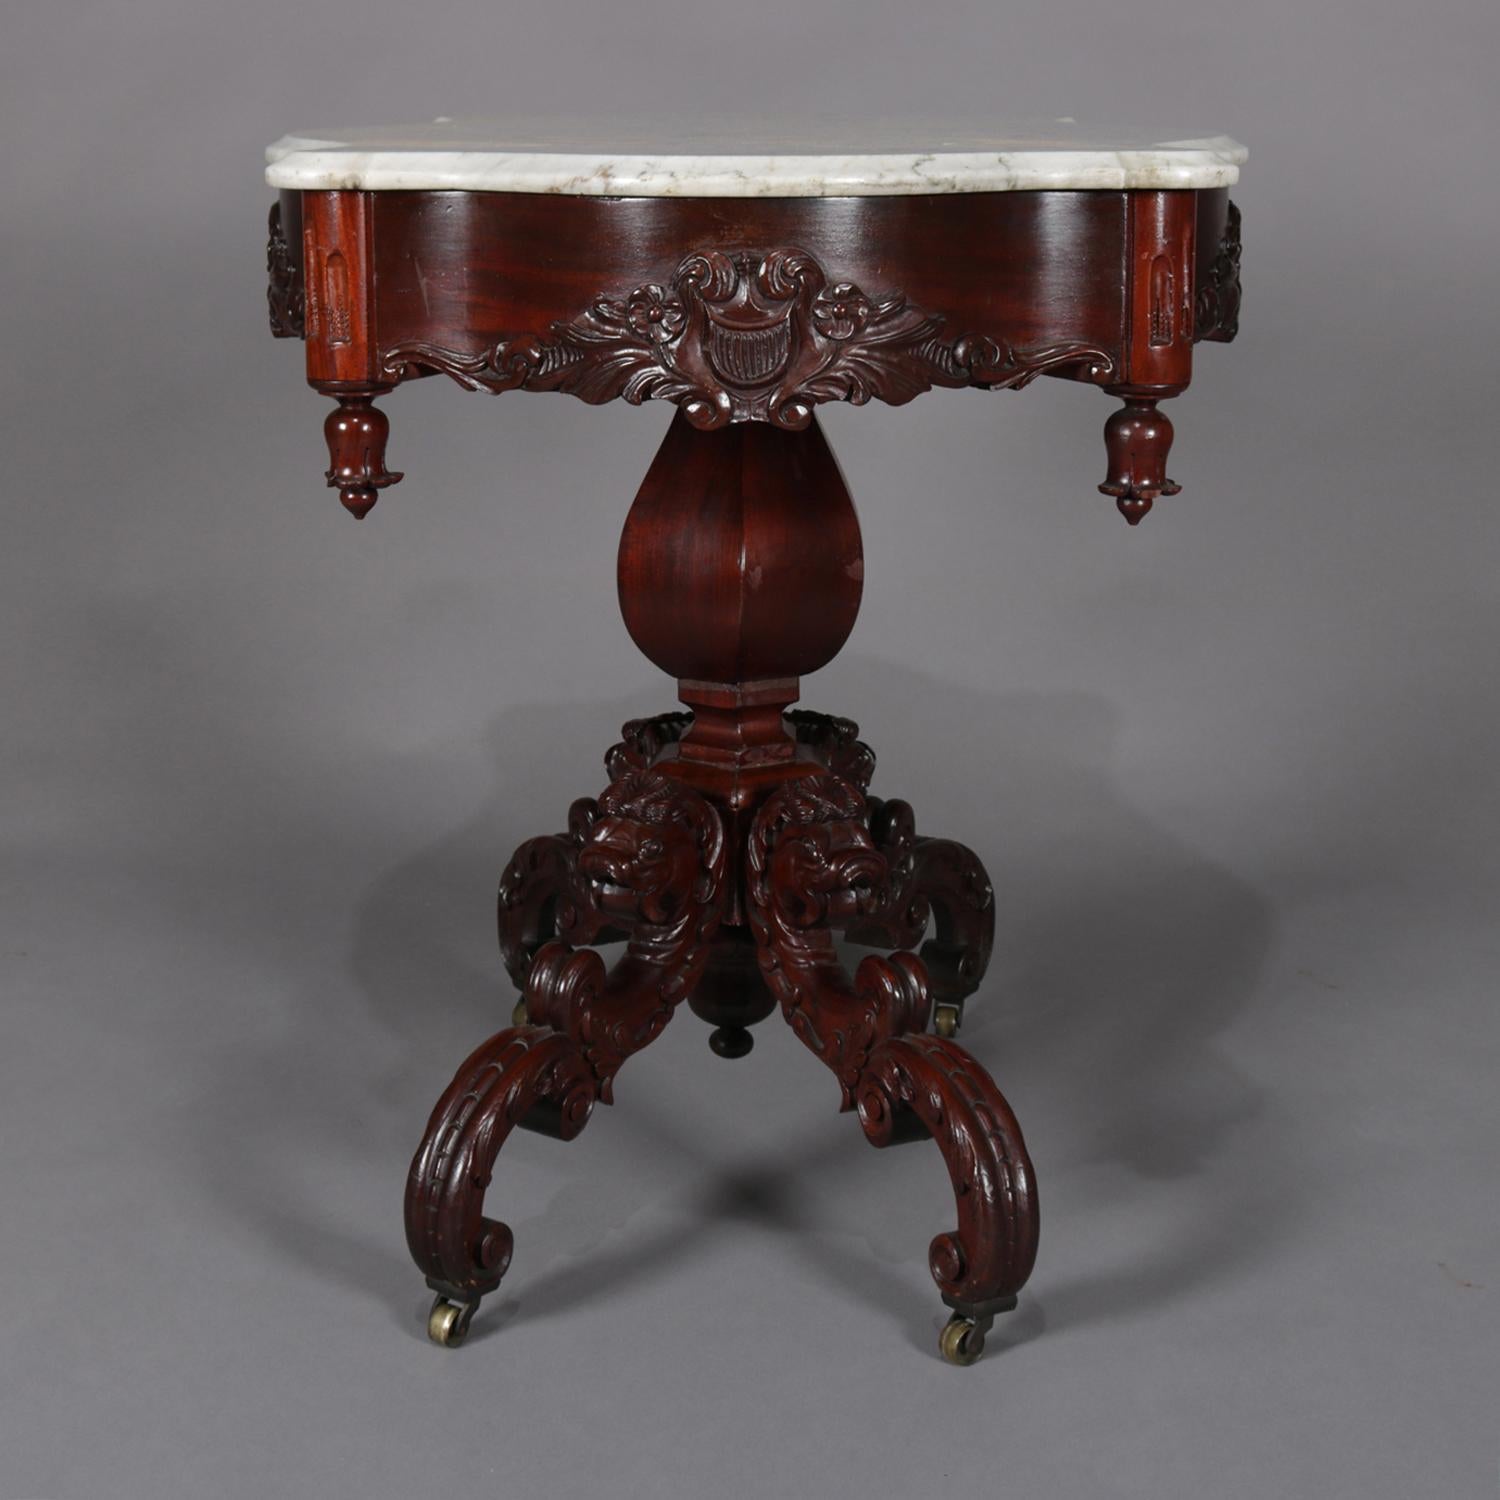 19th Century Antique High Victorian Deeply Carved Rosewood and Marble Turtle Top Table